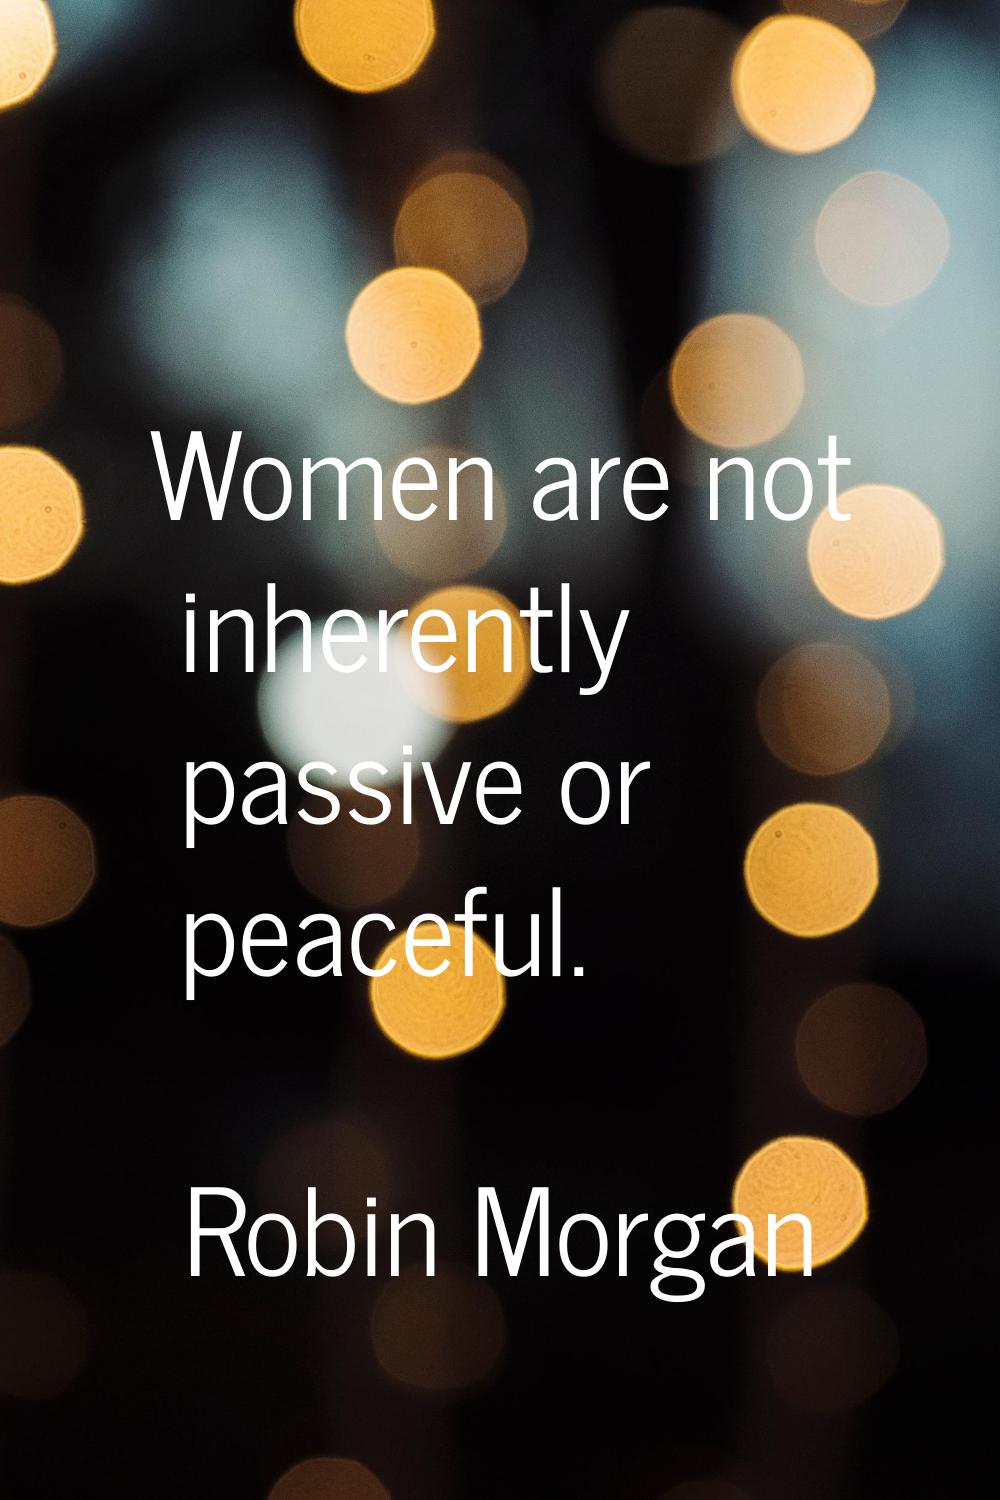 Women are not inherently passive or peaceful.